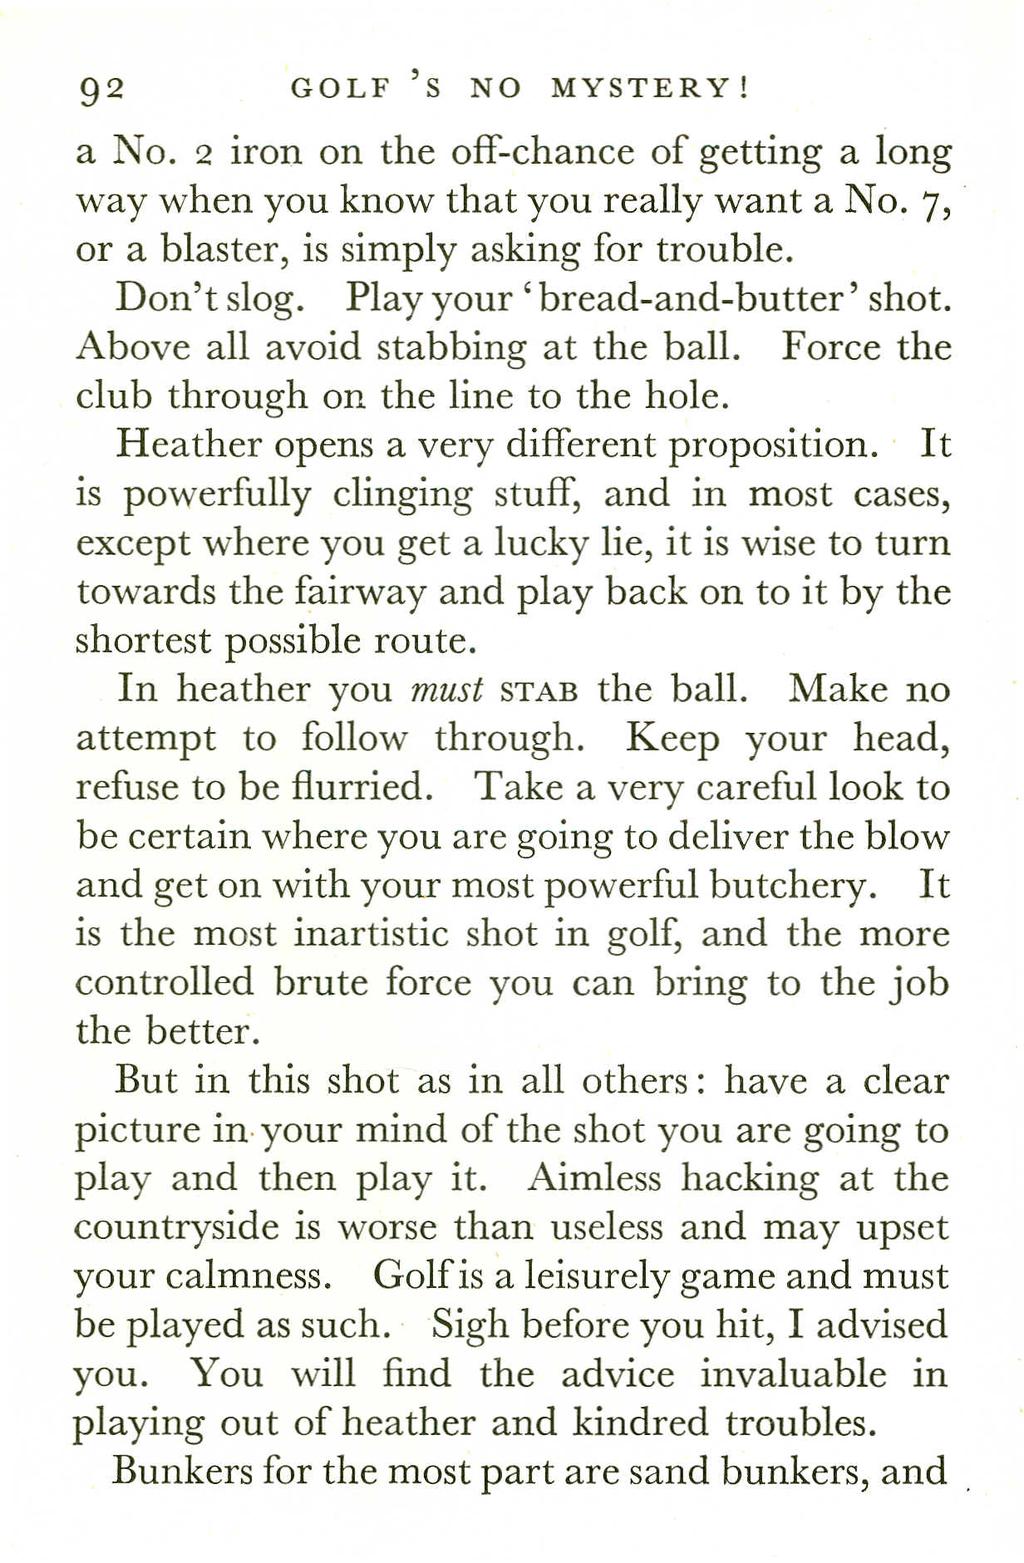 92 GOLF'S NO MYSTERY! a NO.2 iron on the off-chance of getting a long way when you know that you really want a NO.7, or a blaster, is simply asking for trouble. Don't slog.